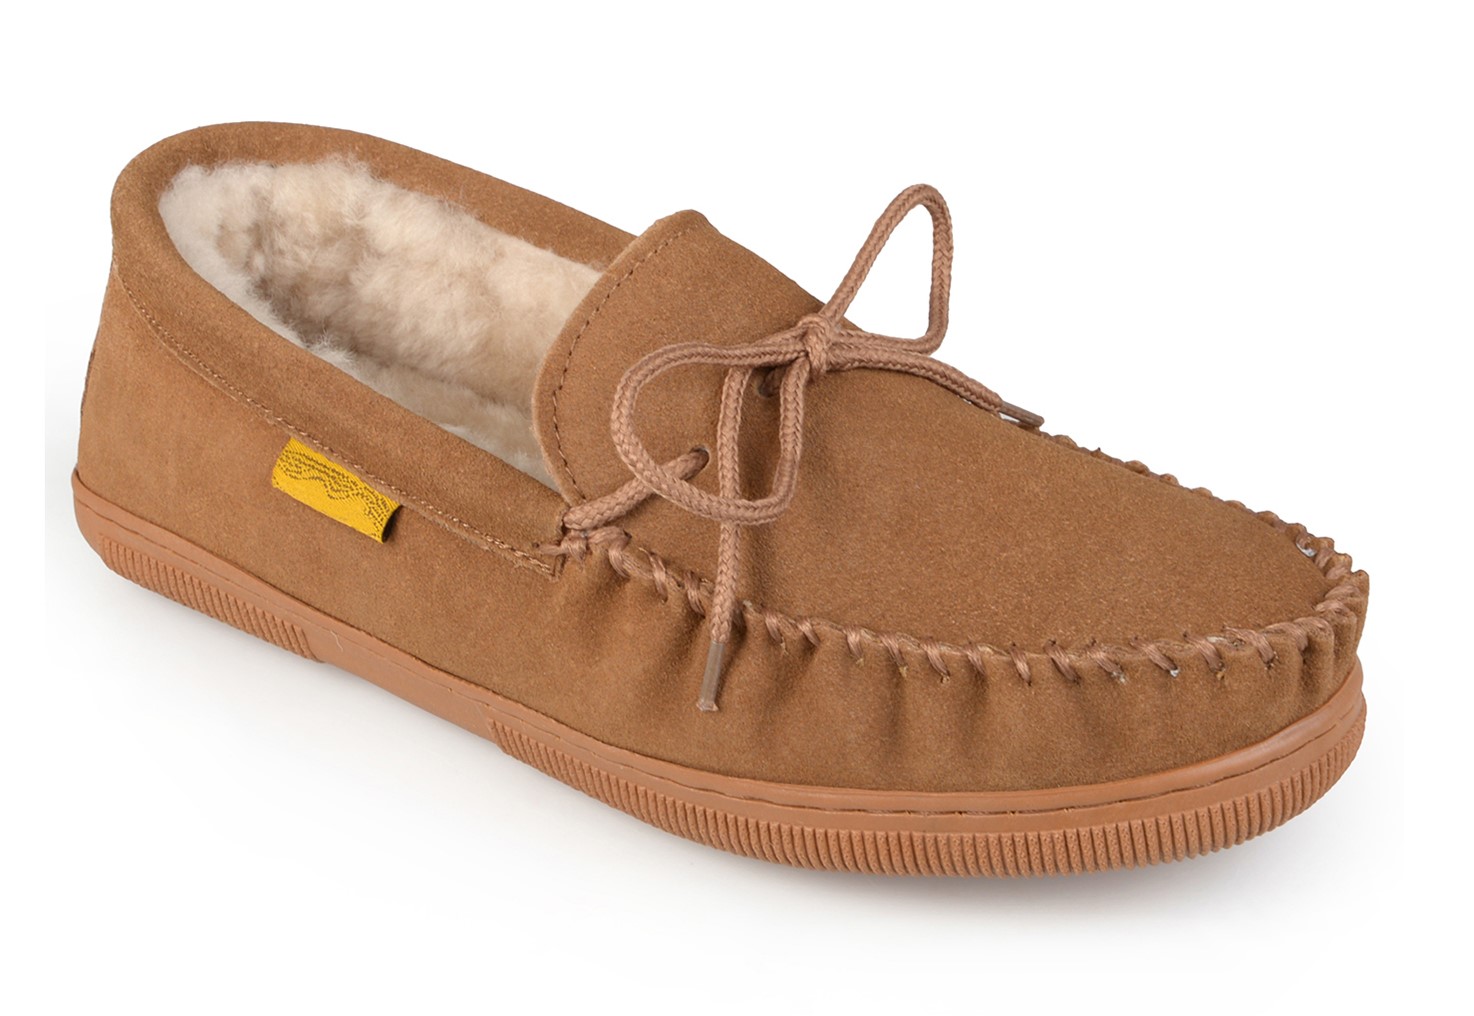 Daxx Men's Hank Leather Moccasin Slipper - image 1 of 6